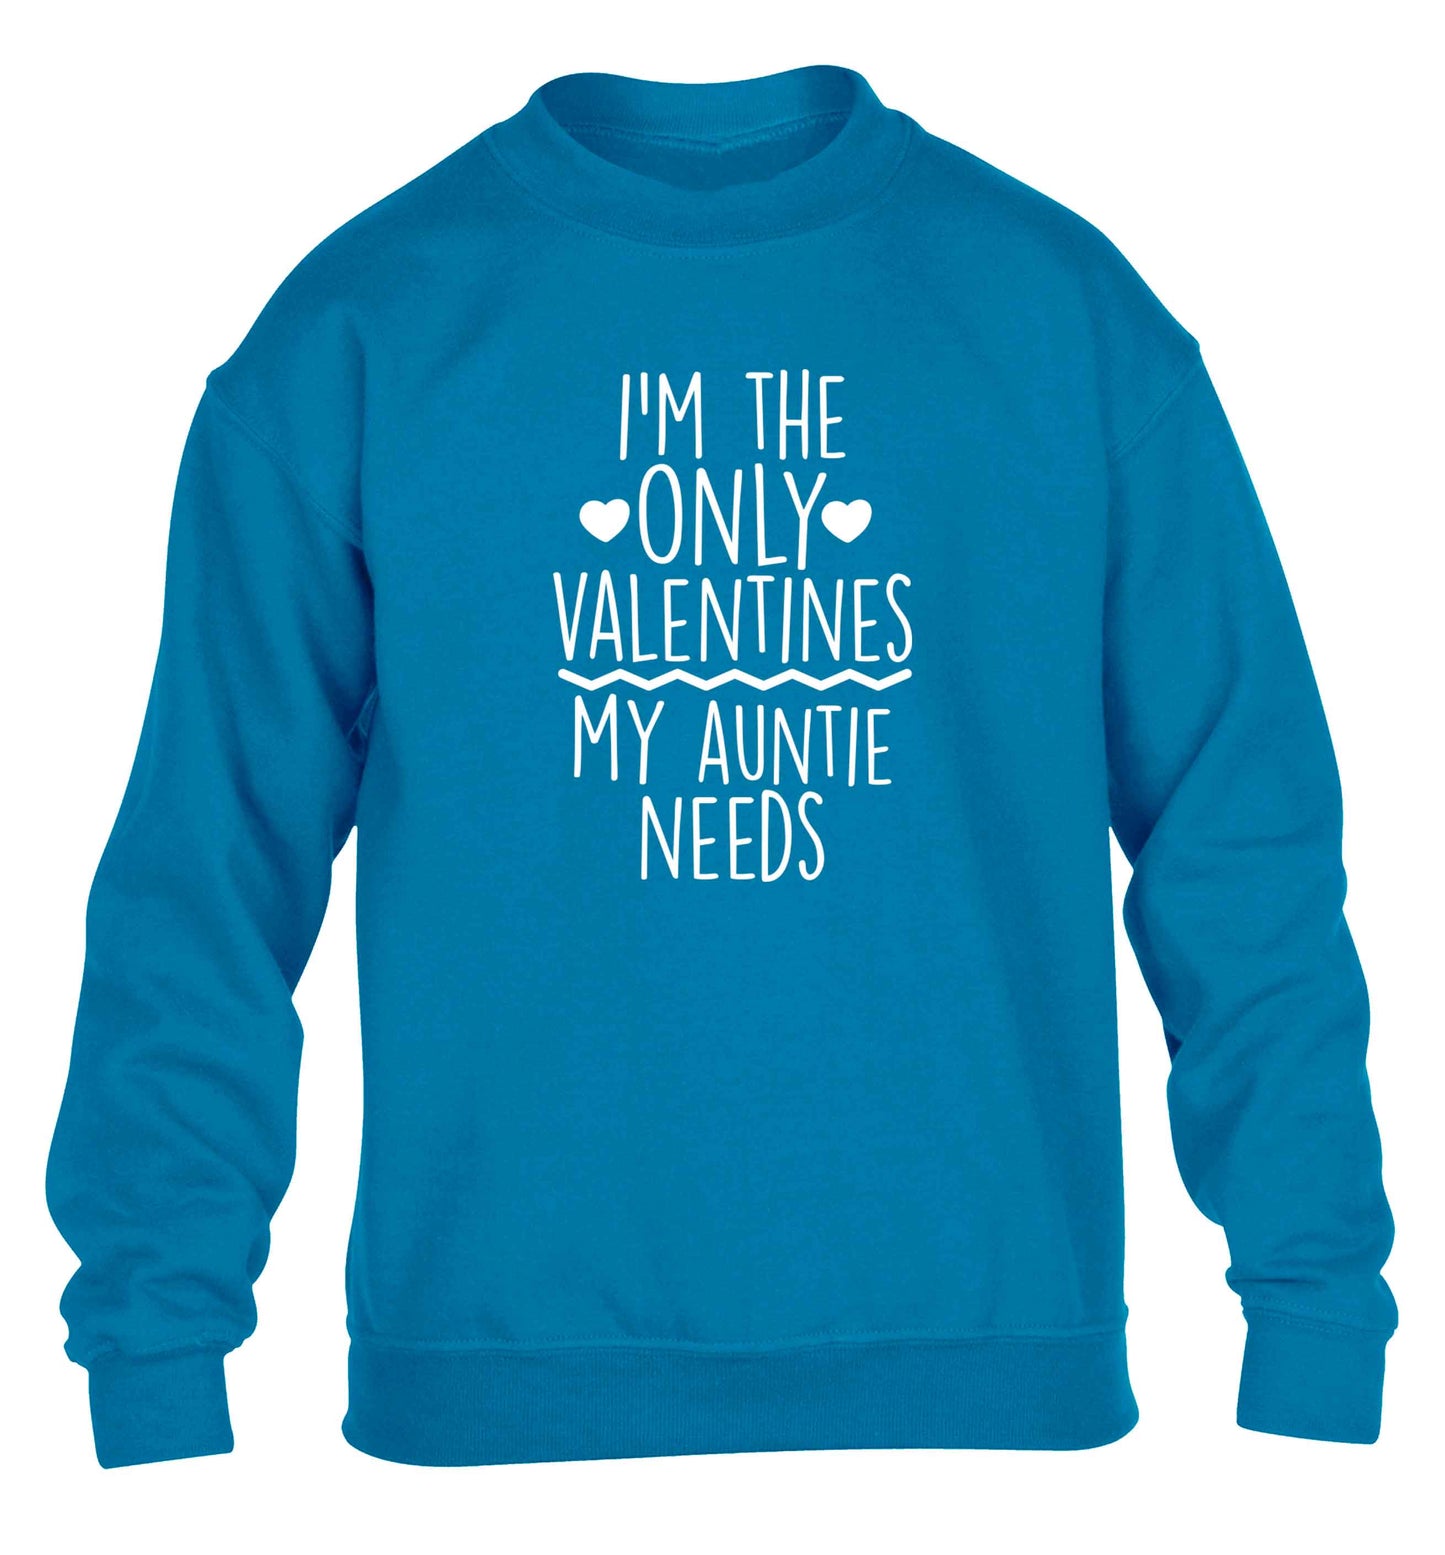 I'm the only valentines my auntie needs children's blue sweater 12-13 Years